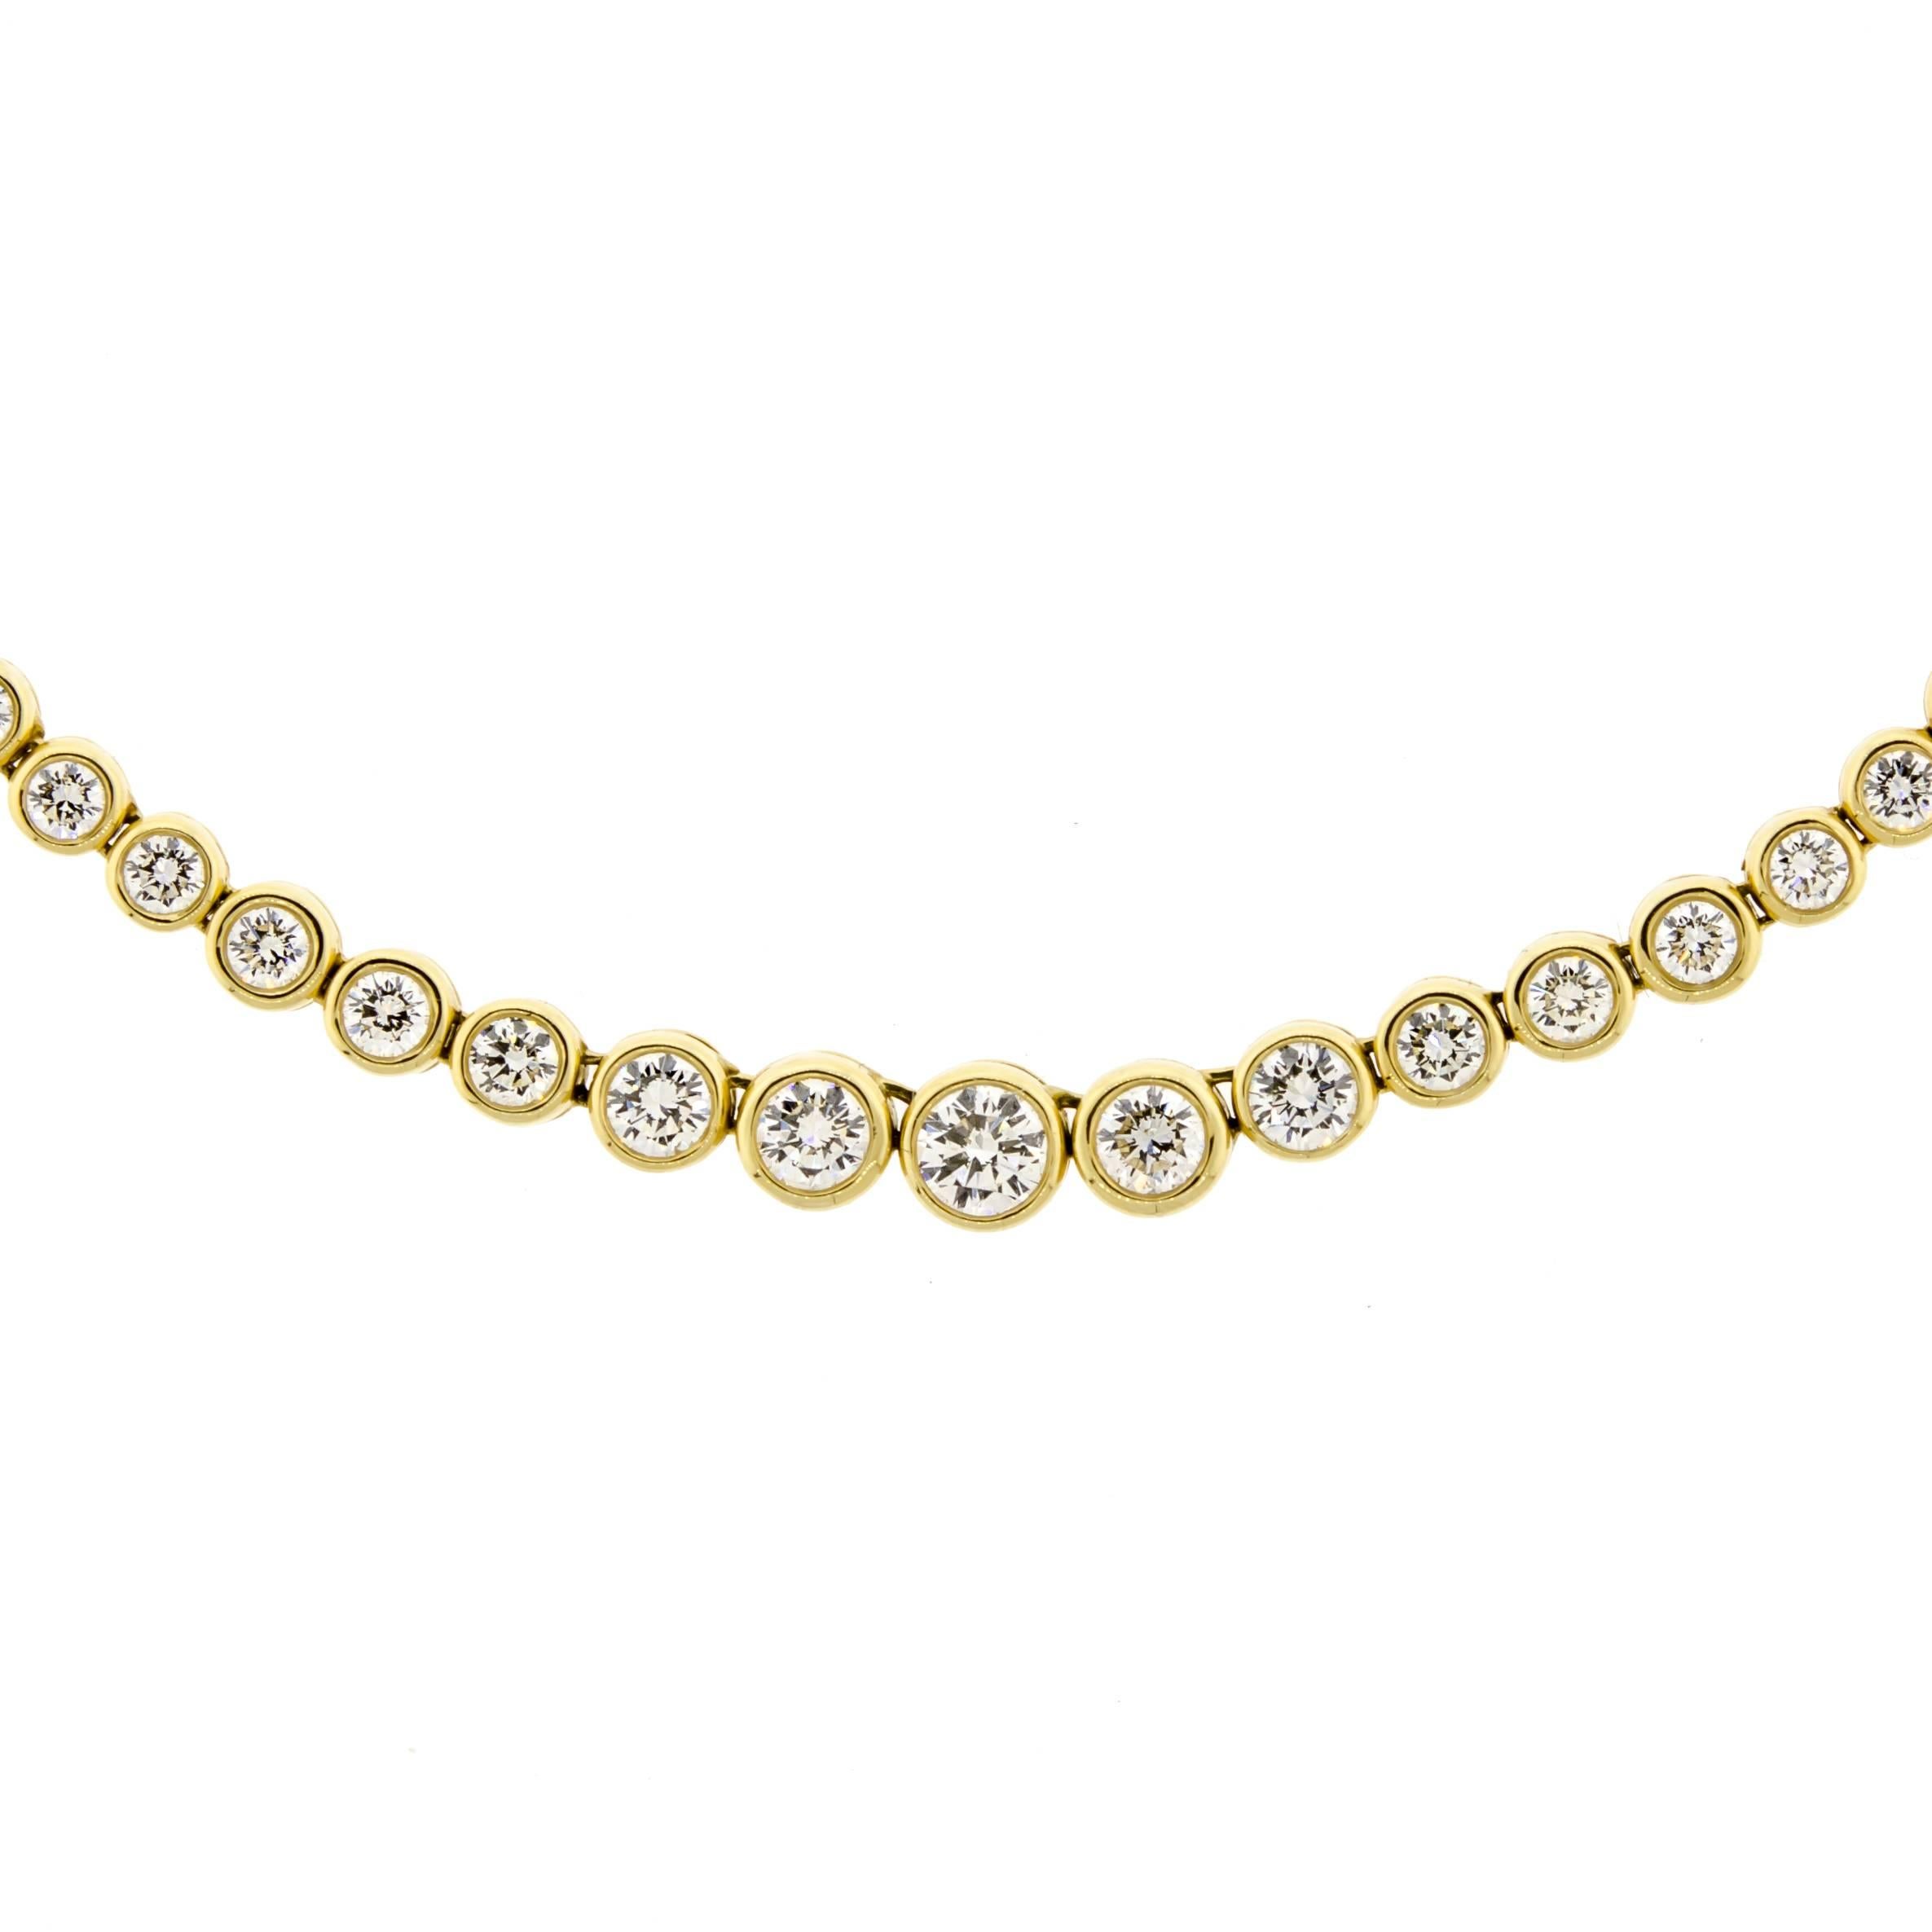 This stunning contemporary diamond and 14kt yellow gold lady's tennis style necklace sparkles and dazzles magnificently. The ravishing Round Brilliant Cut diamonds pop against the high polished glowing 14 karat yellow gold in which they are set.  
